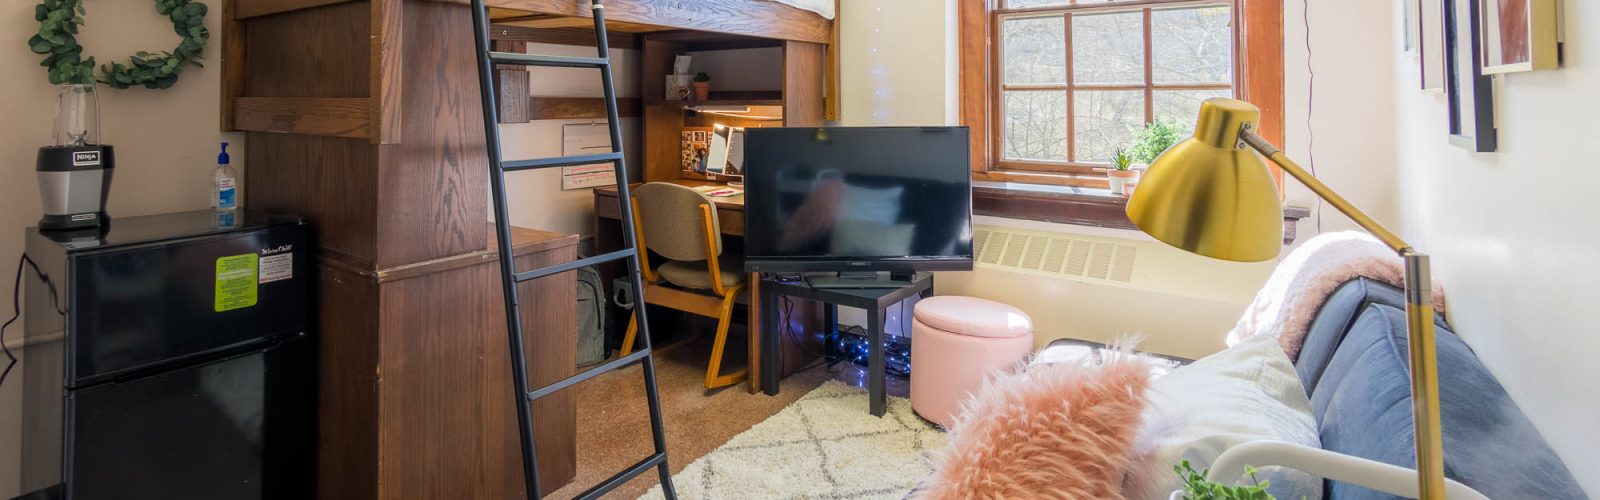 A single room in Tripp Residence Hall in 2019